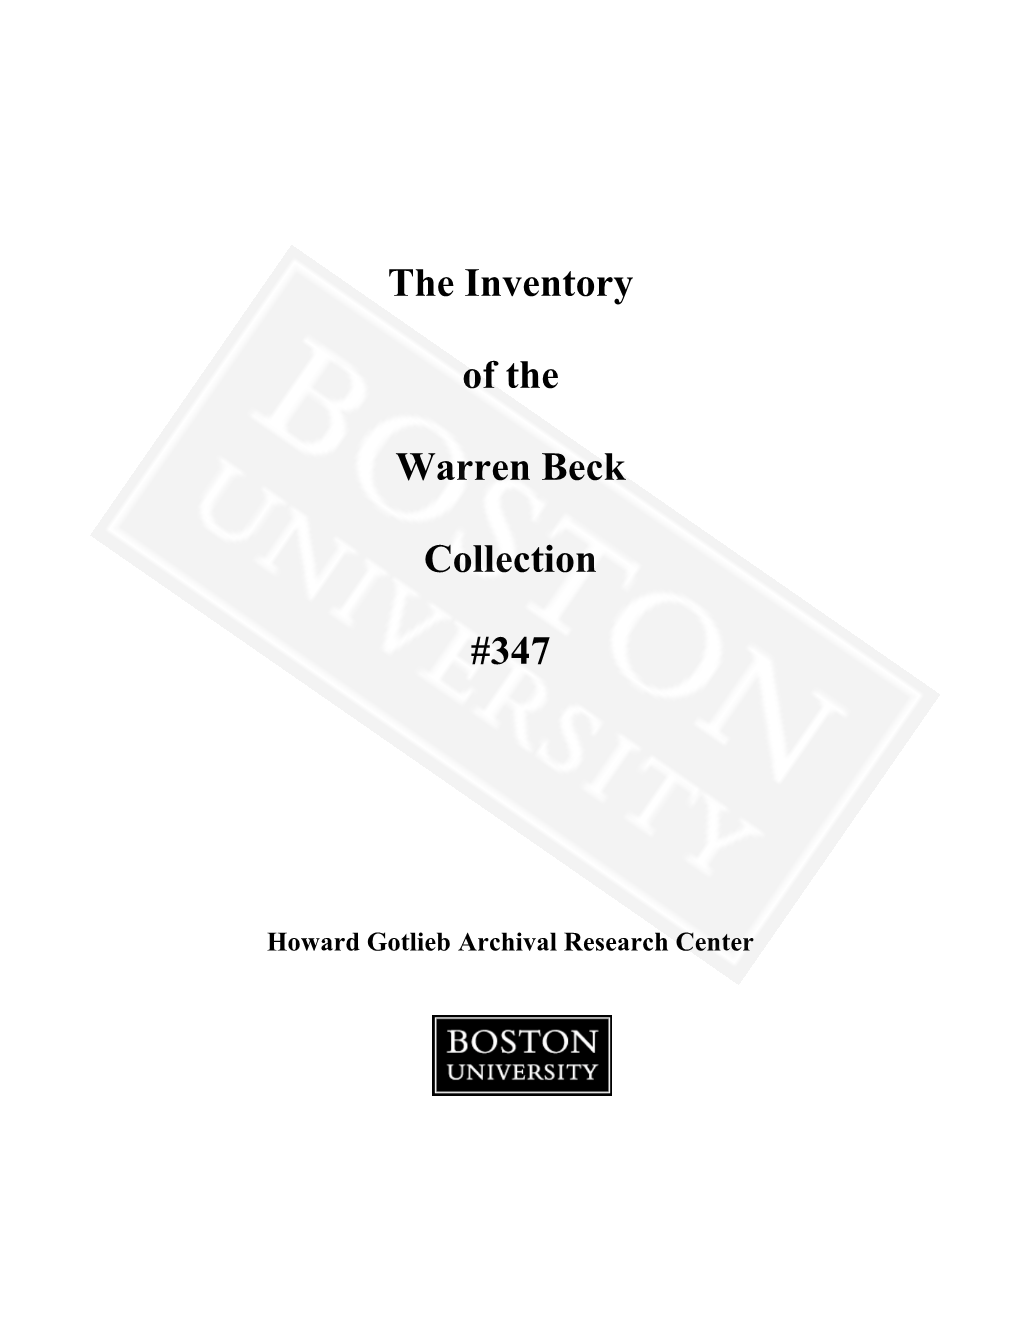 The Inventory of the Warren Beck Collection #347